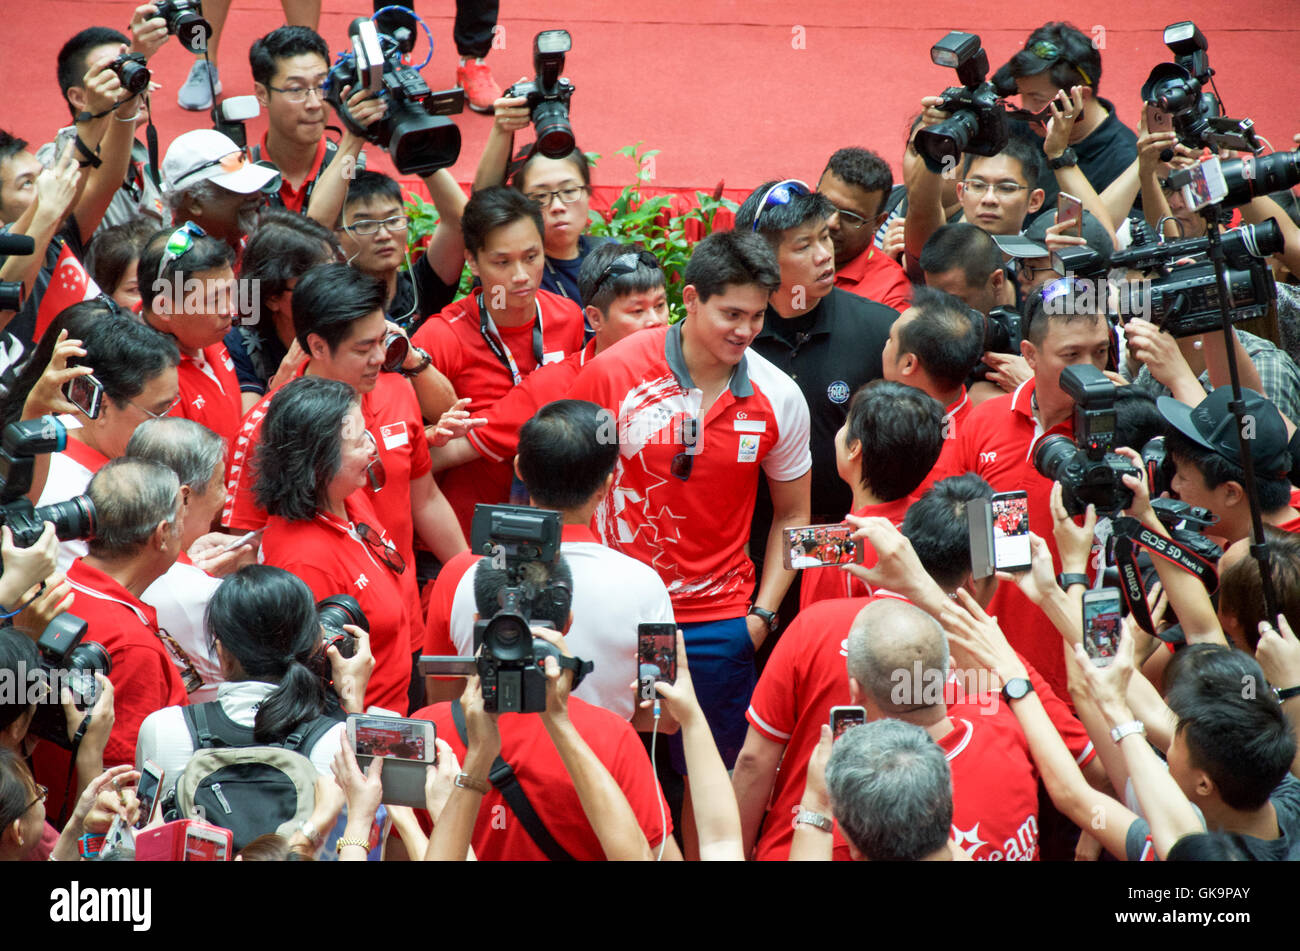 Joseph Schooling, the Singapore's first Olympic gold medalist, on his victory parade around Singapore Stock Photo